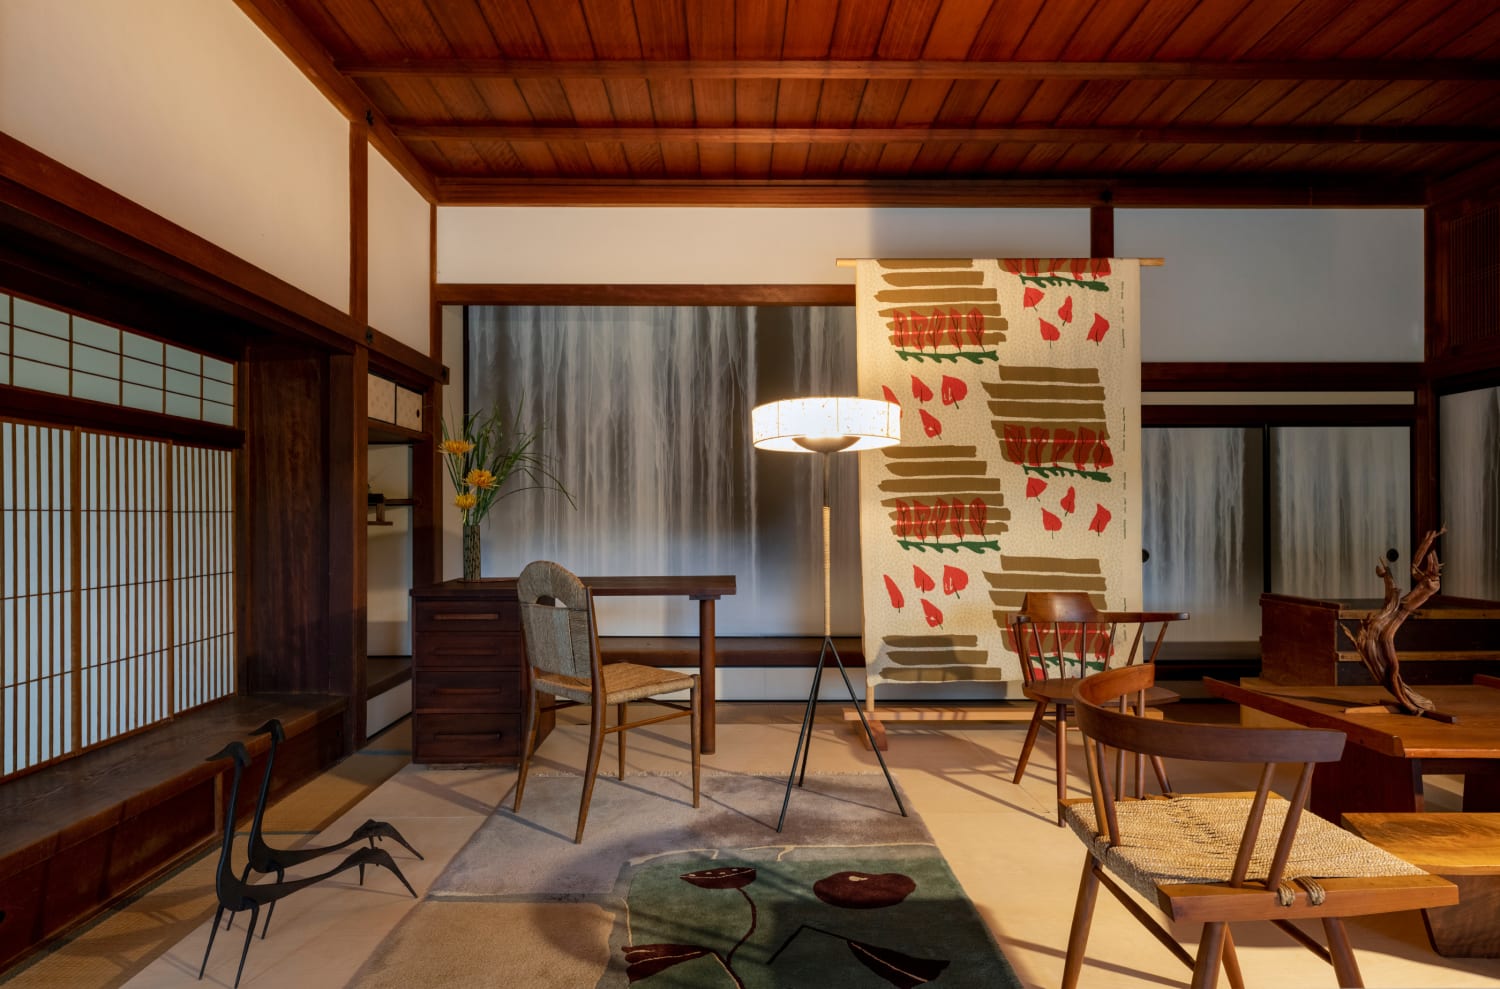 Shofuso and Modernism revisits a major mid-century East-West cultural exchange